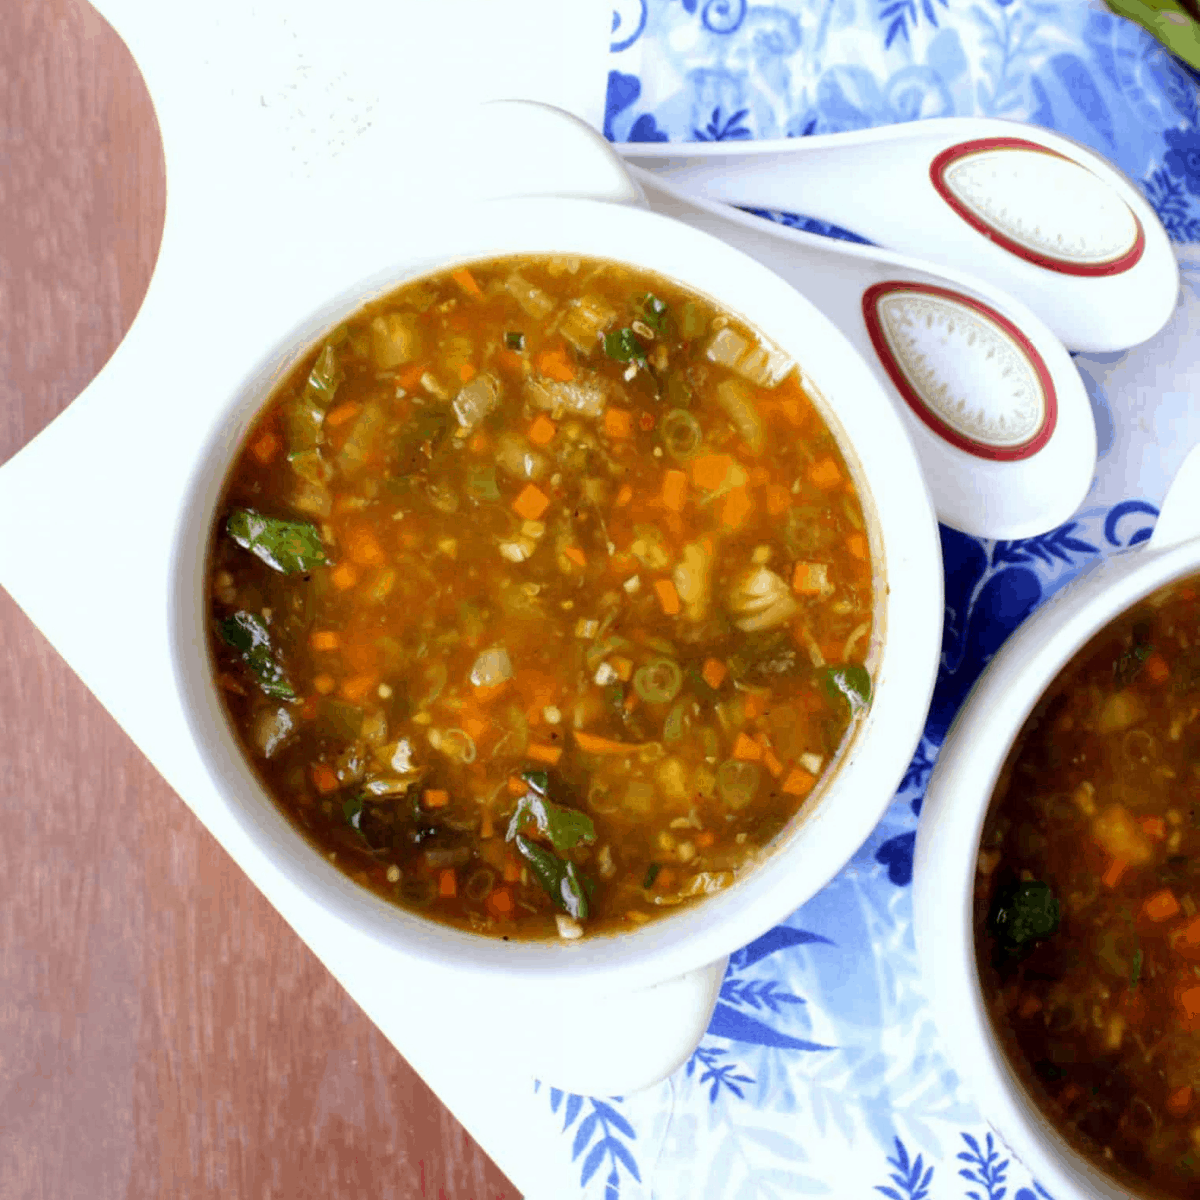 Chinese Hot And Sour Soup - Vegetable Hot And Sour Soup